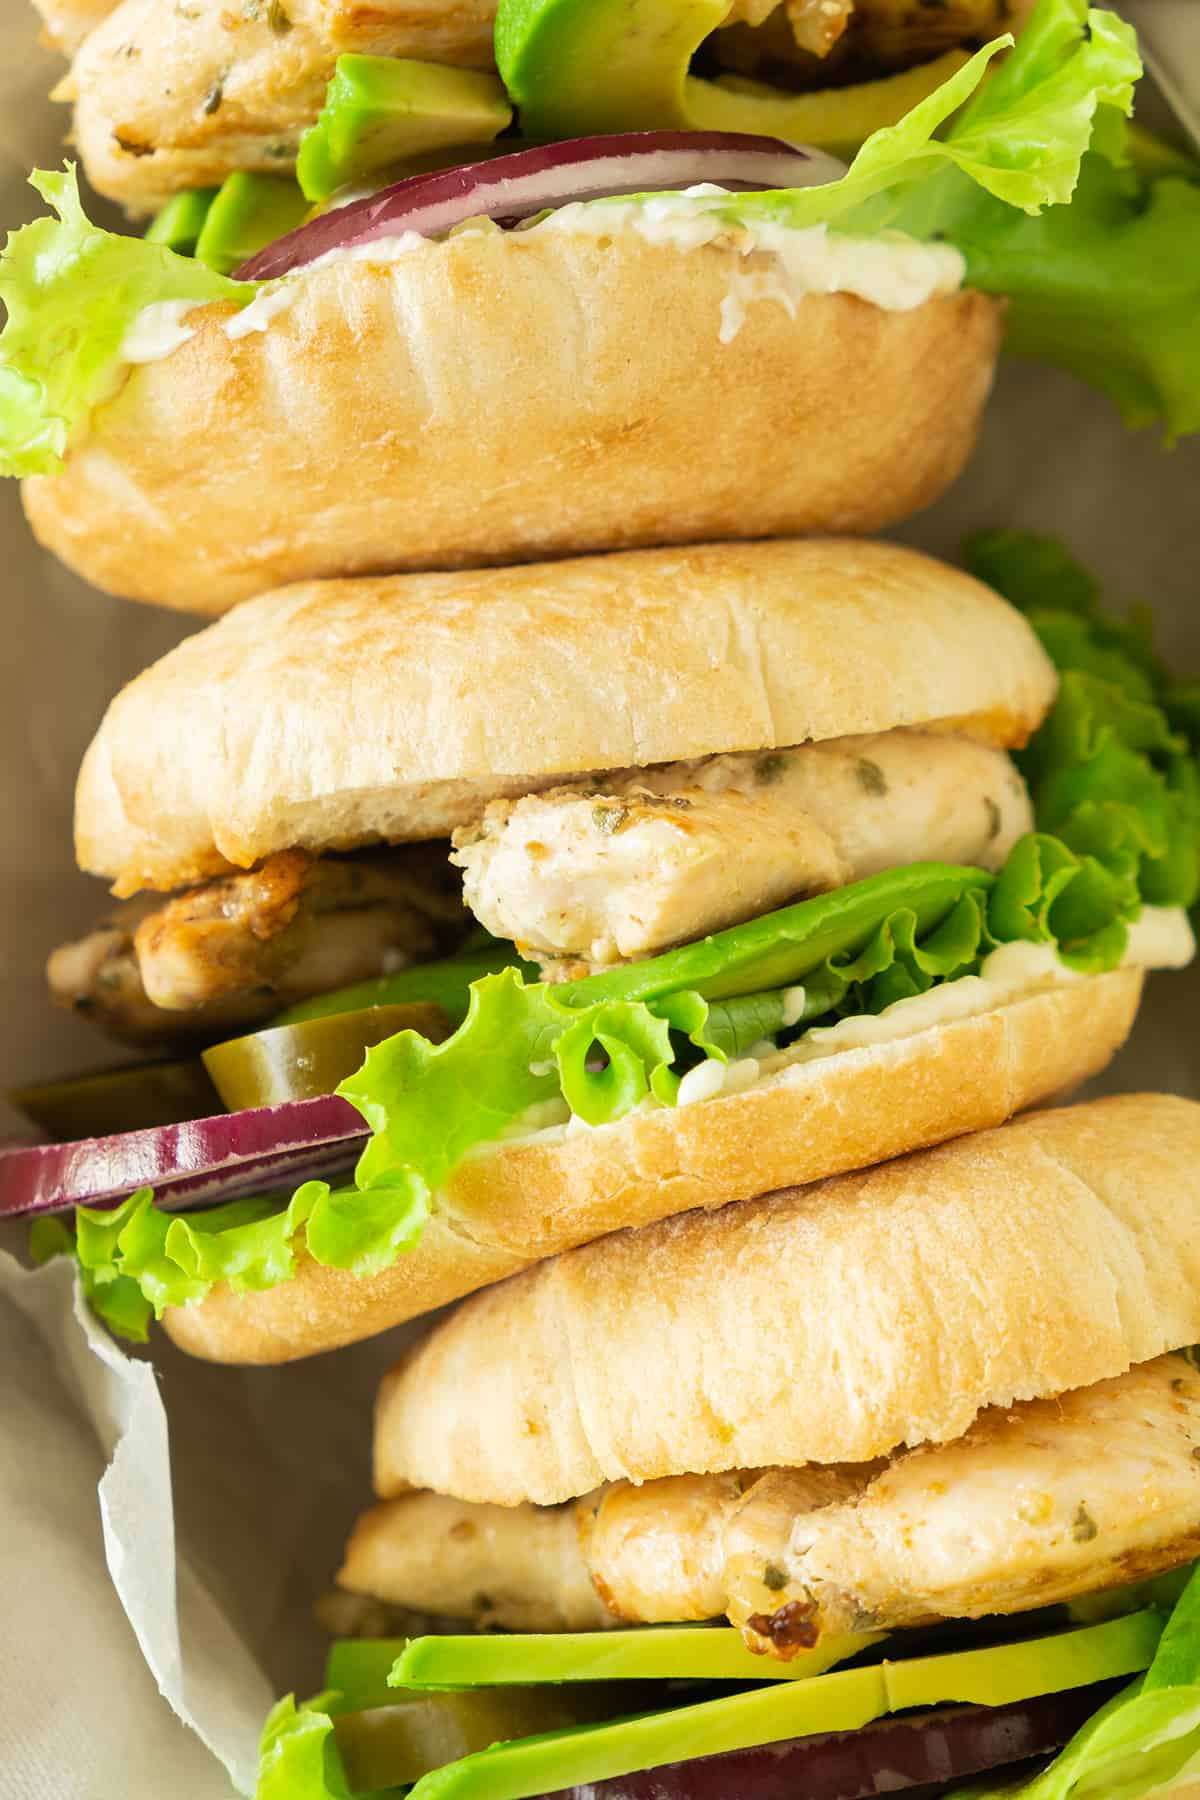 Tortas de pollo (or chicken sandwiches) served and ready to eat.